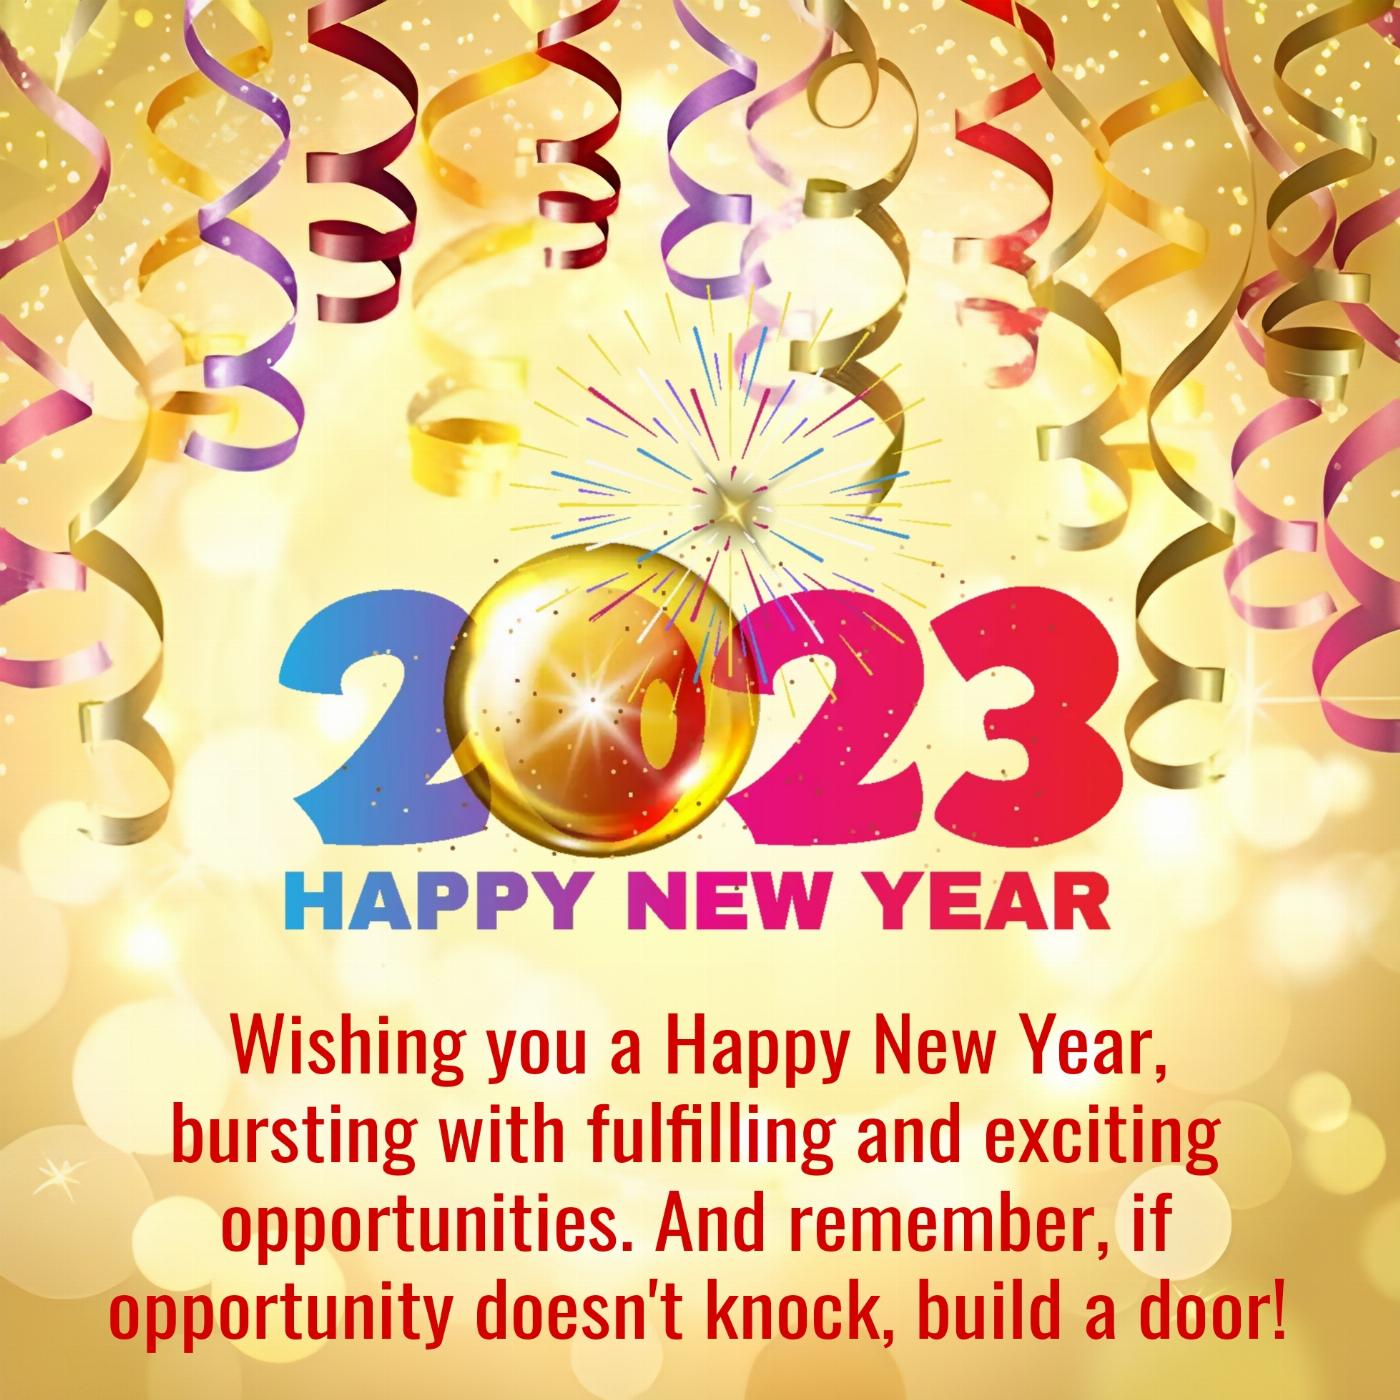 Wishing you a Happy New Year bursting with fulfilling